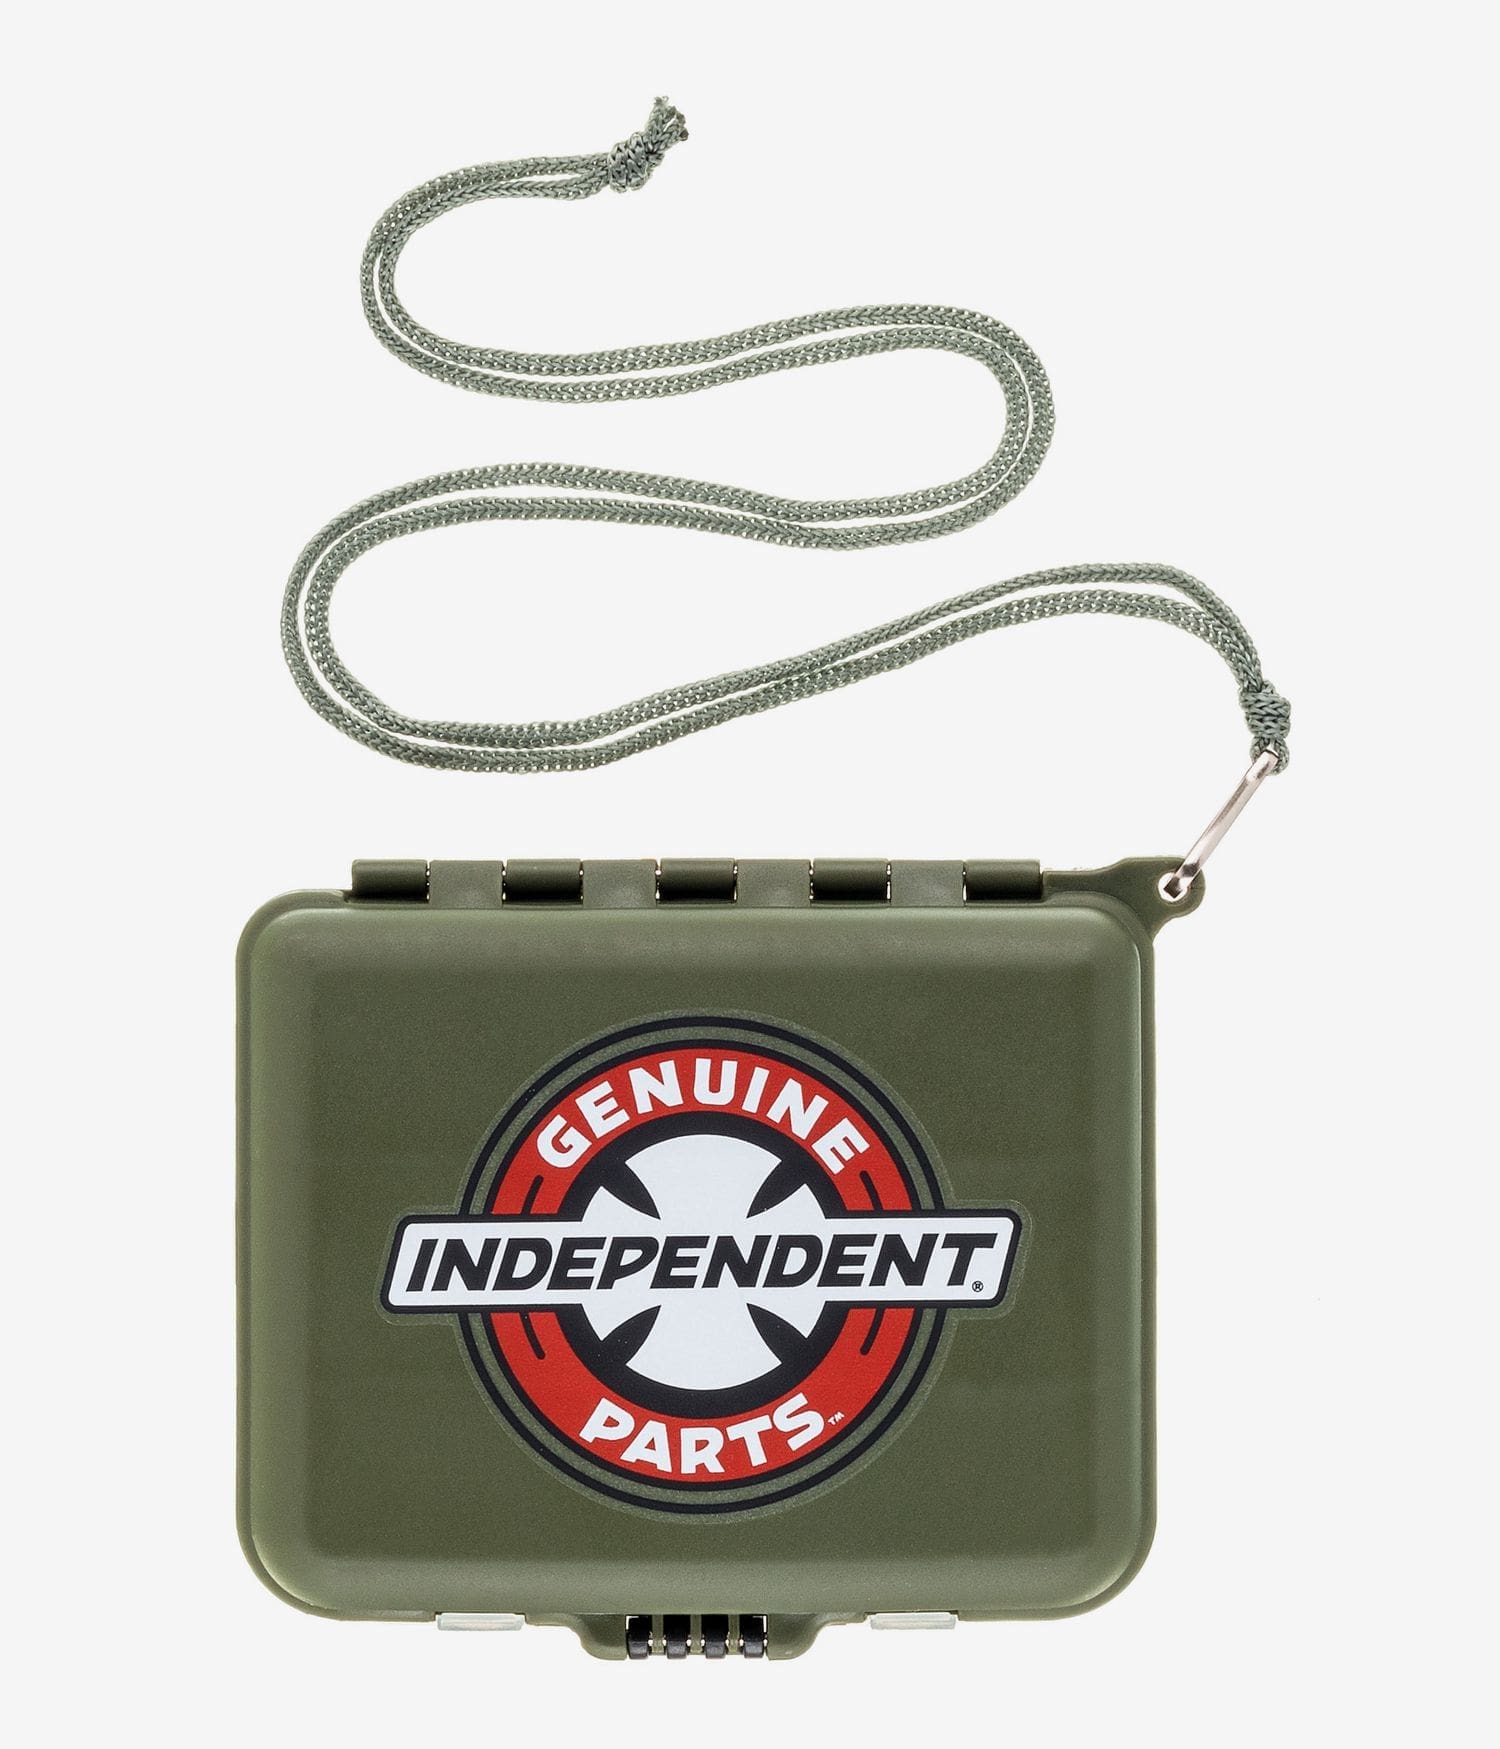 INDEPENDENT SPARE PARTS TRAVEL KIT